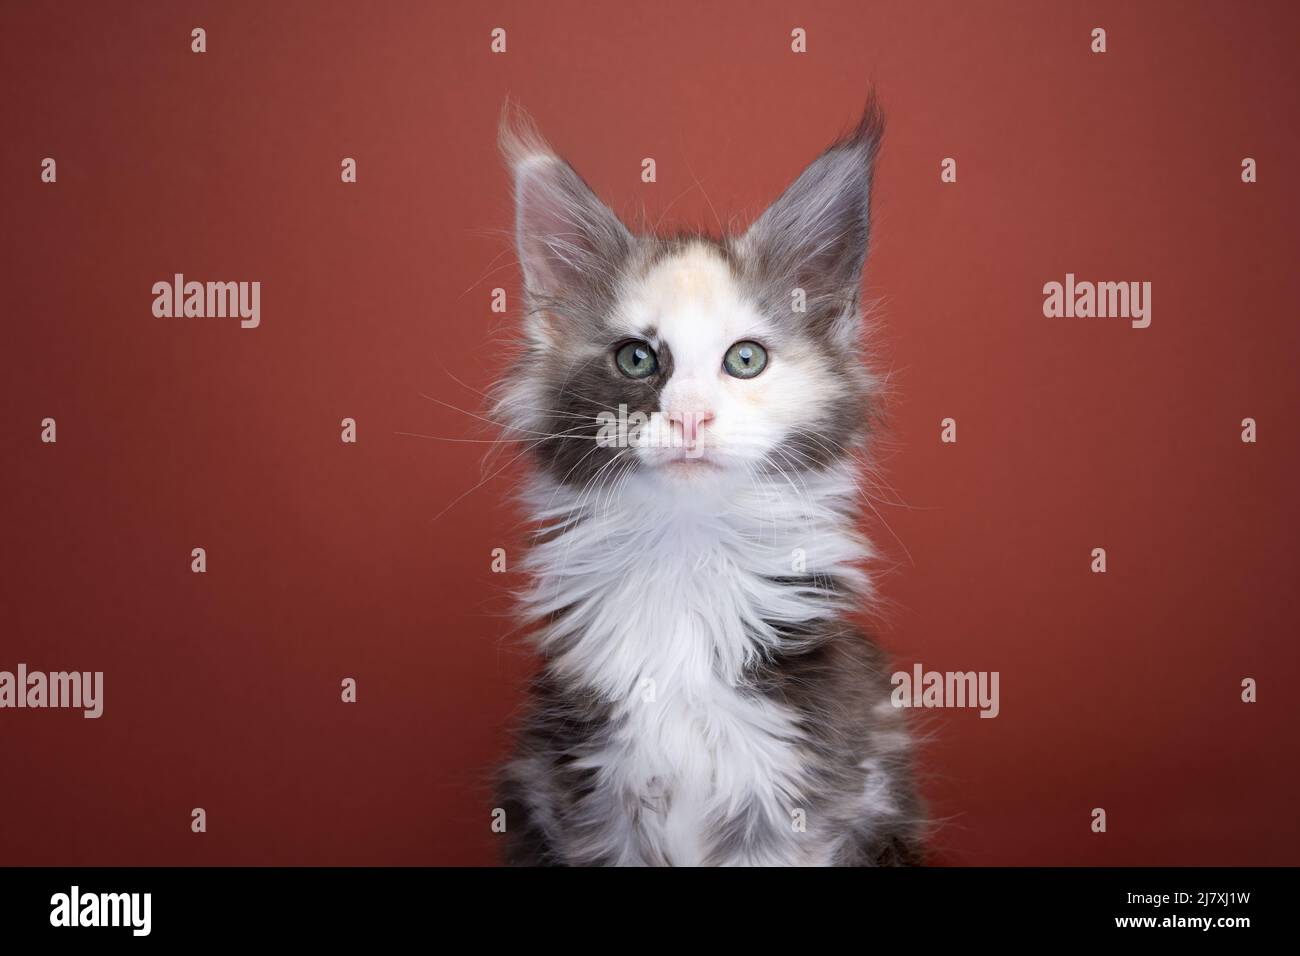 beautiful white calico maine coon kitten portrait on red brown background with copy space Stock Photo